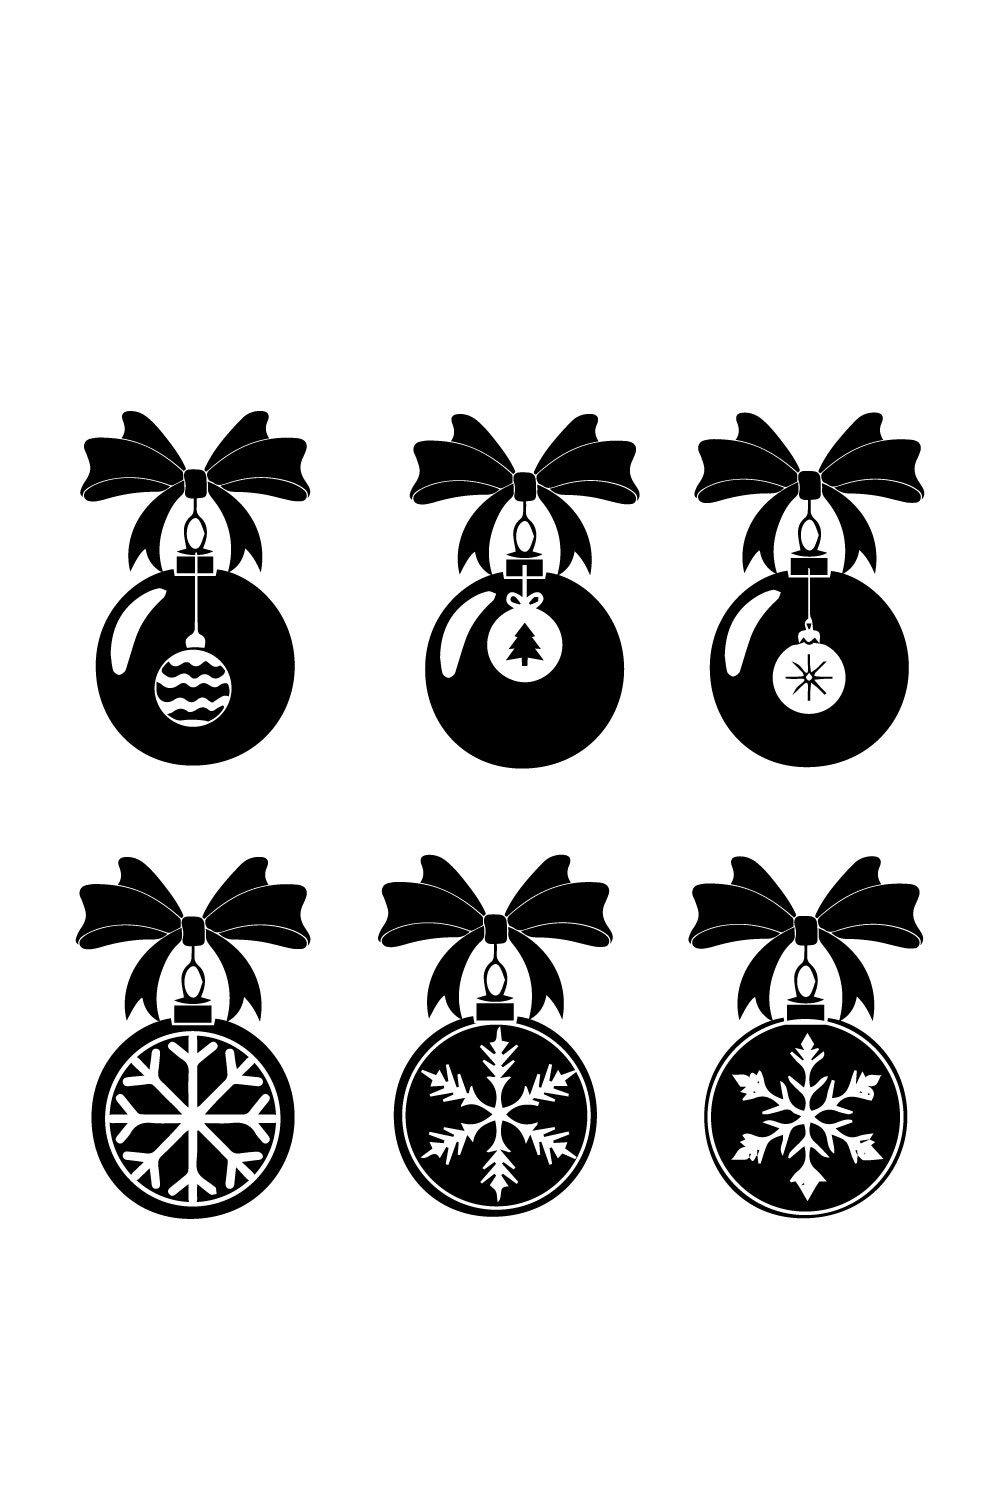 Set of black gorgeous images of Christmas tree decorations in the form of a ball